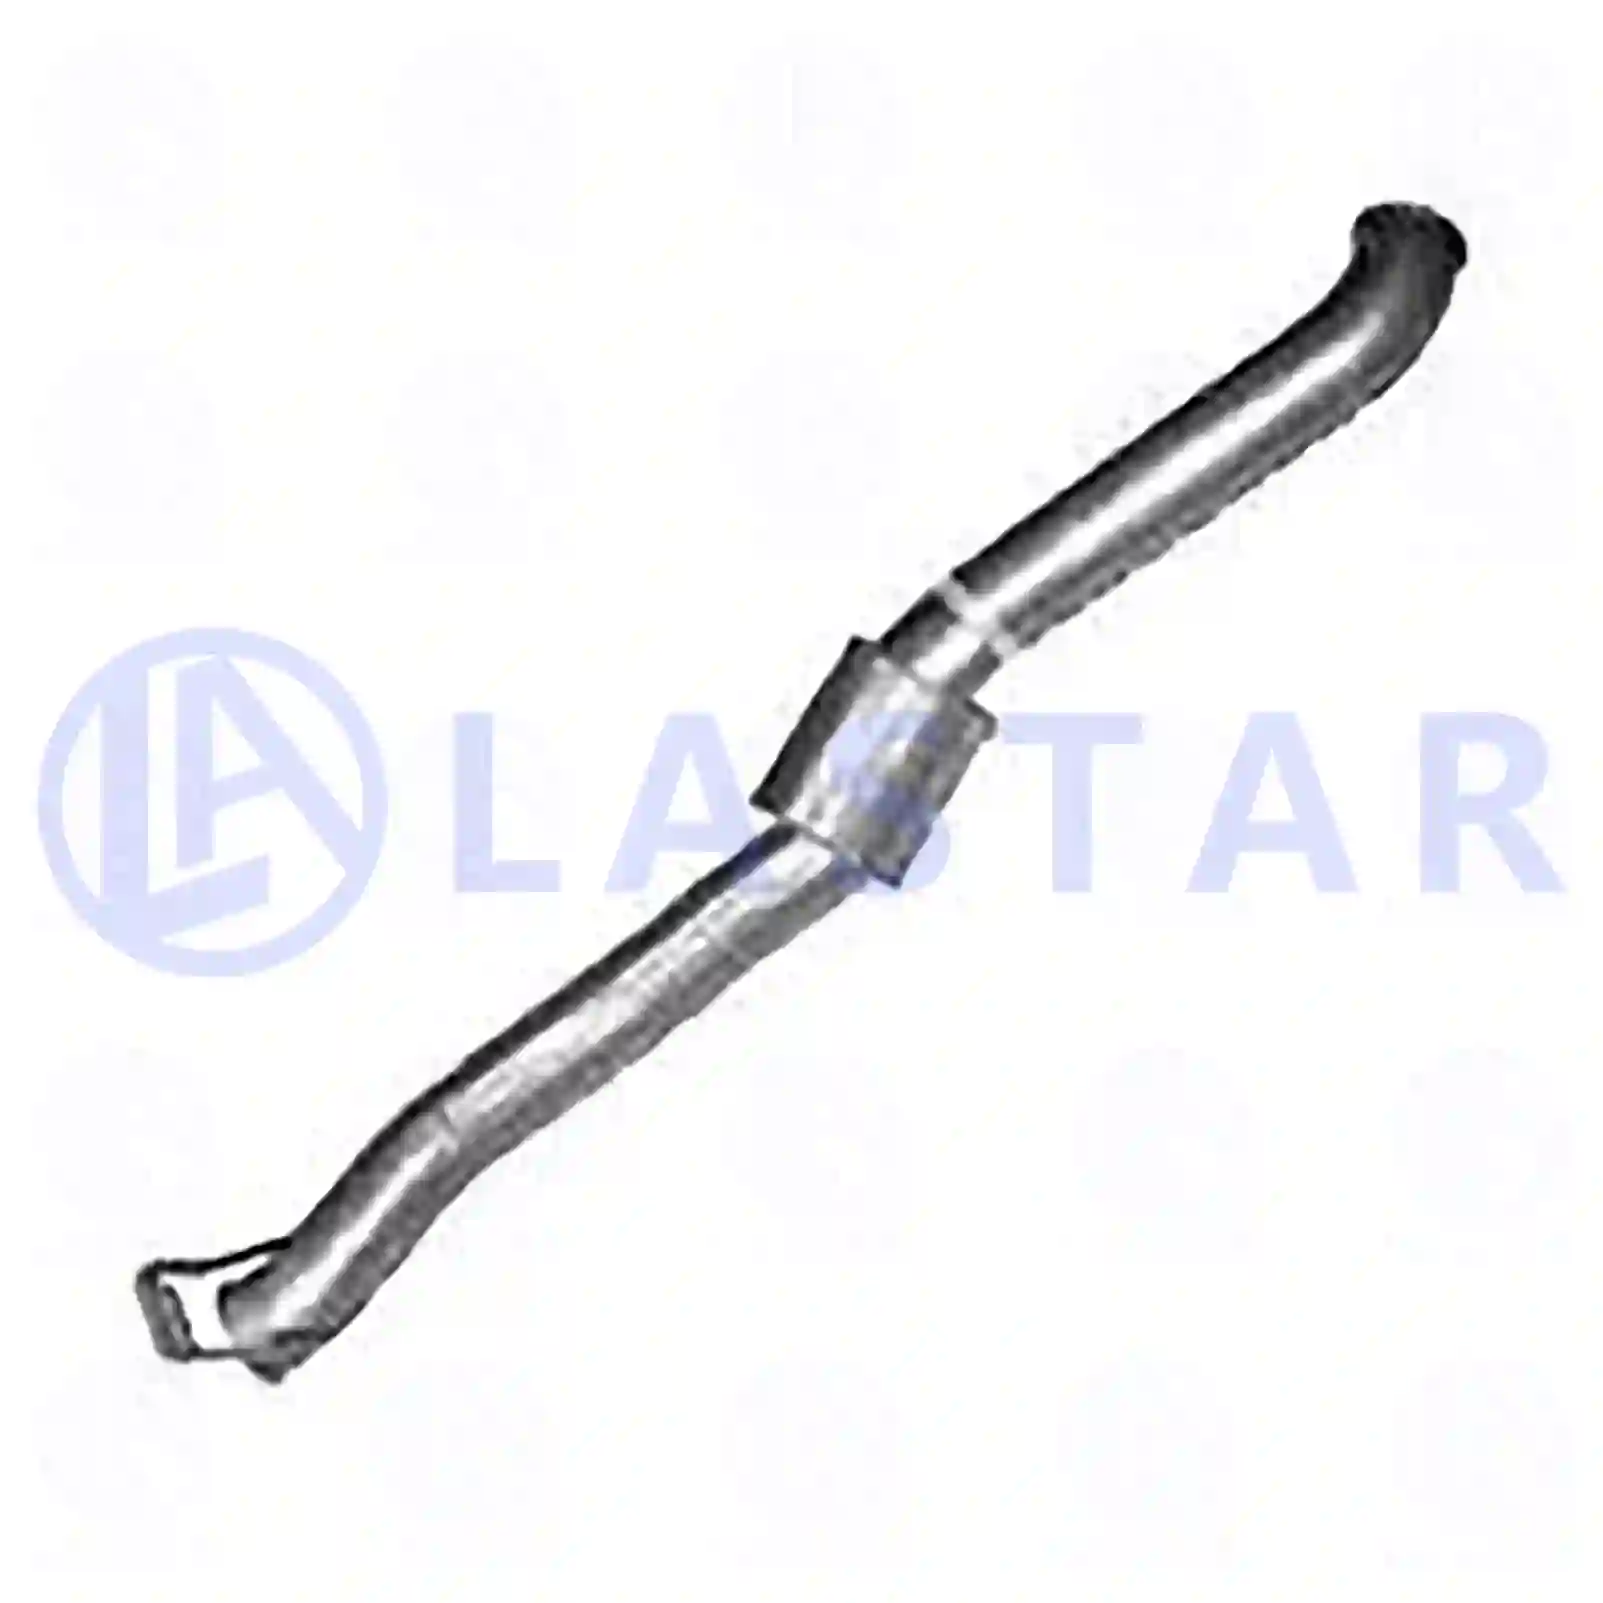 Exhaust pipe, 77706568, 1373201, 1397273 ||  77706568 Lastar Spare Part | Truck Spare Parts, Auotomotive Spare Parts Exhaust pipe, 77706568, 1373201, 1397273 ||  77706568 Lastar Spare Part | Truck Spare Parts, Auotomotive Spare Parts